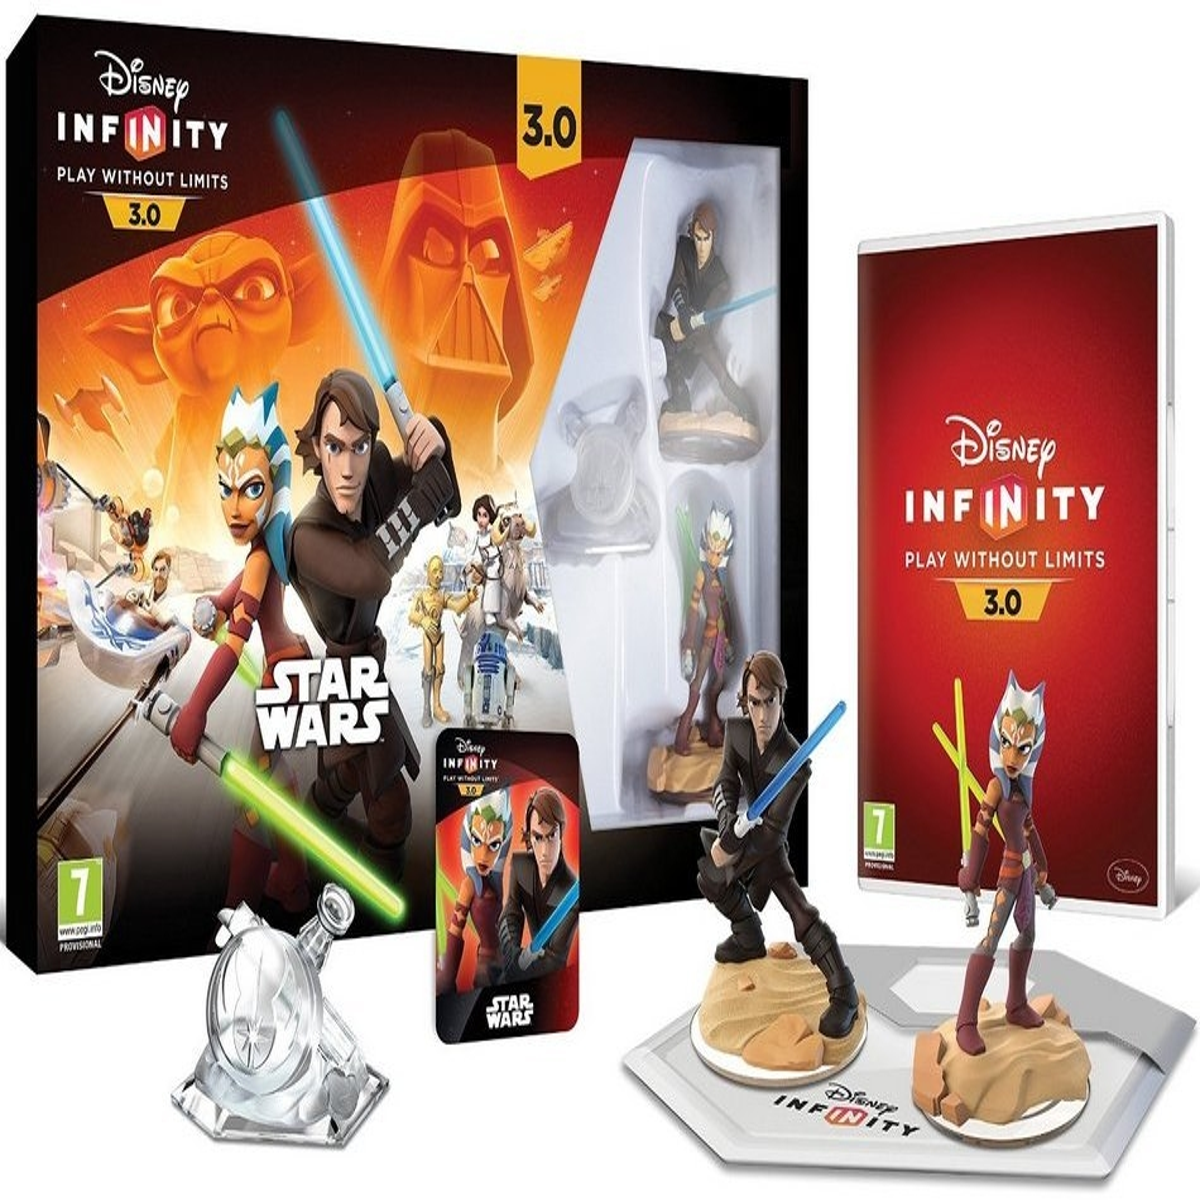 Disney Infinity 3.0 release date set for August